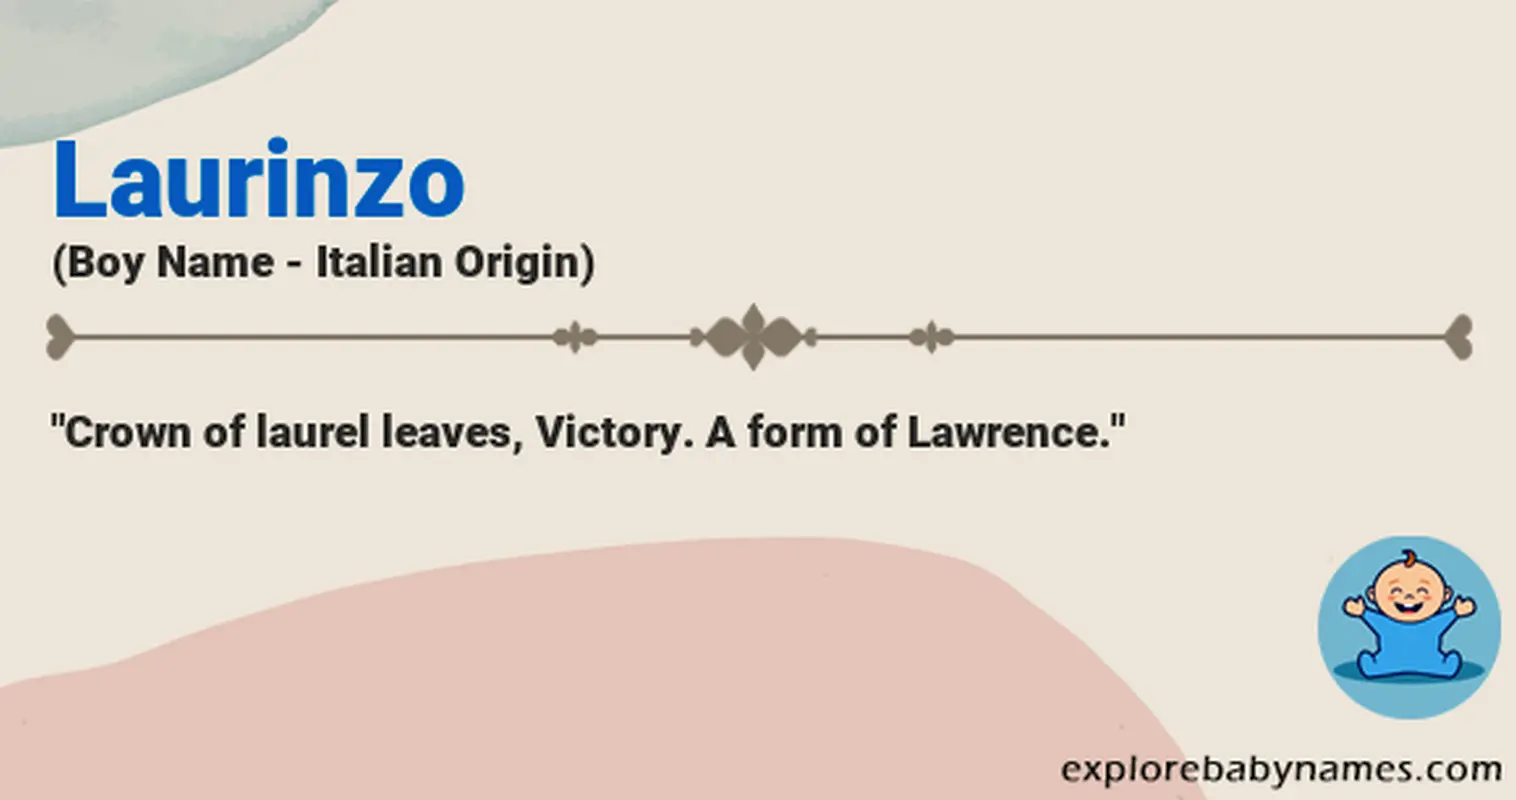 Meaning of Laurinzo